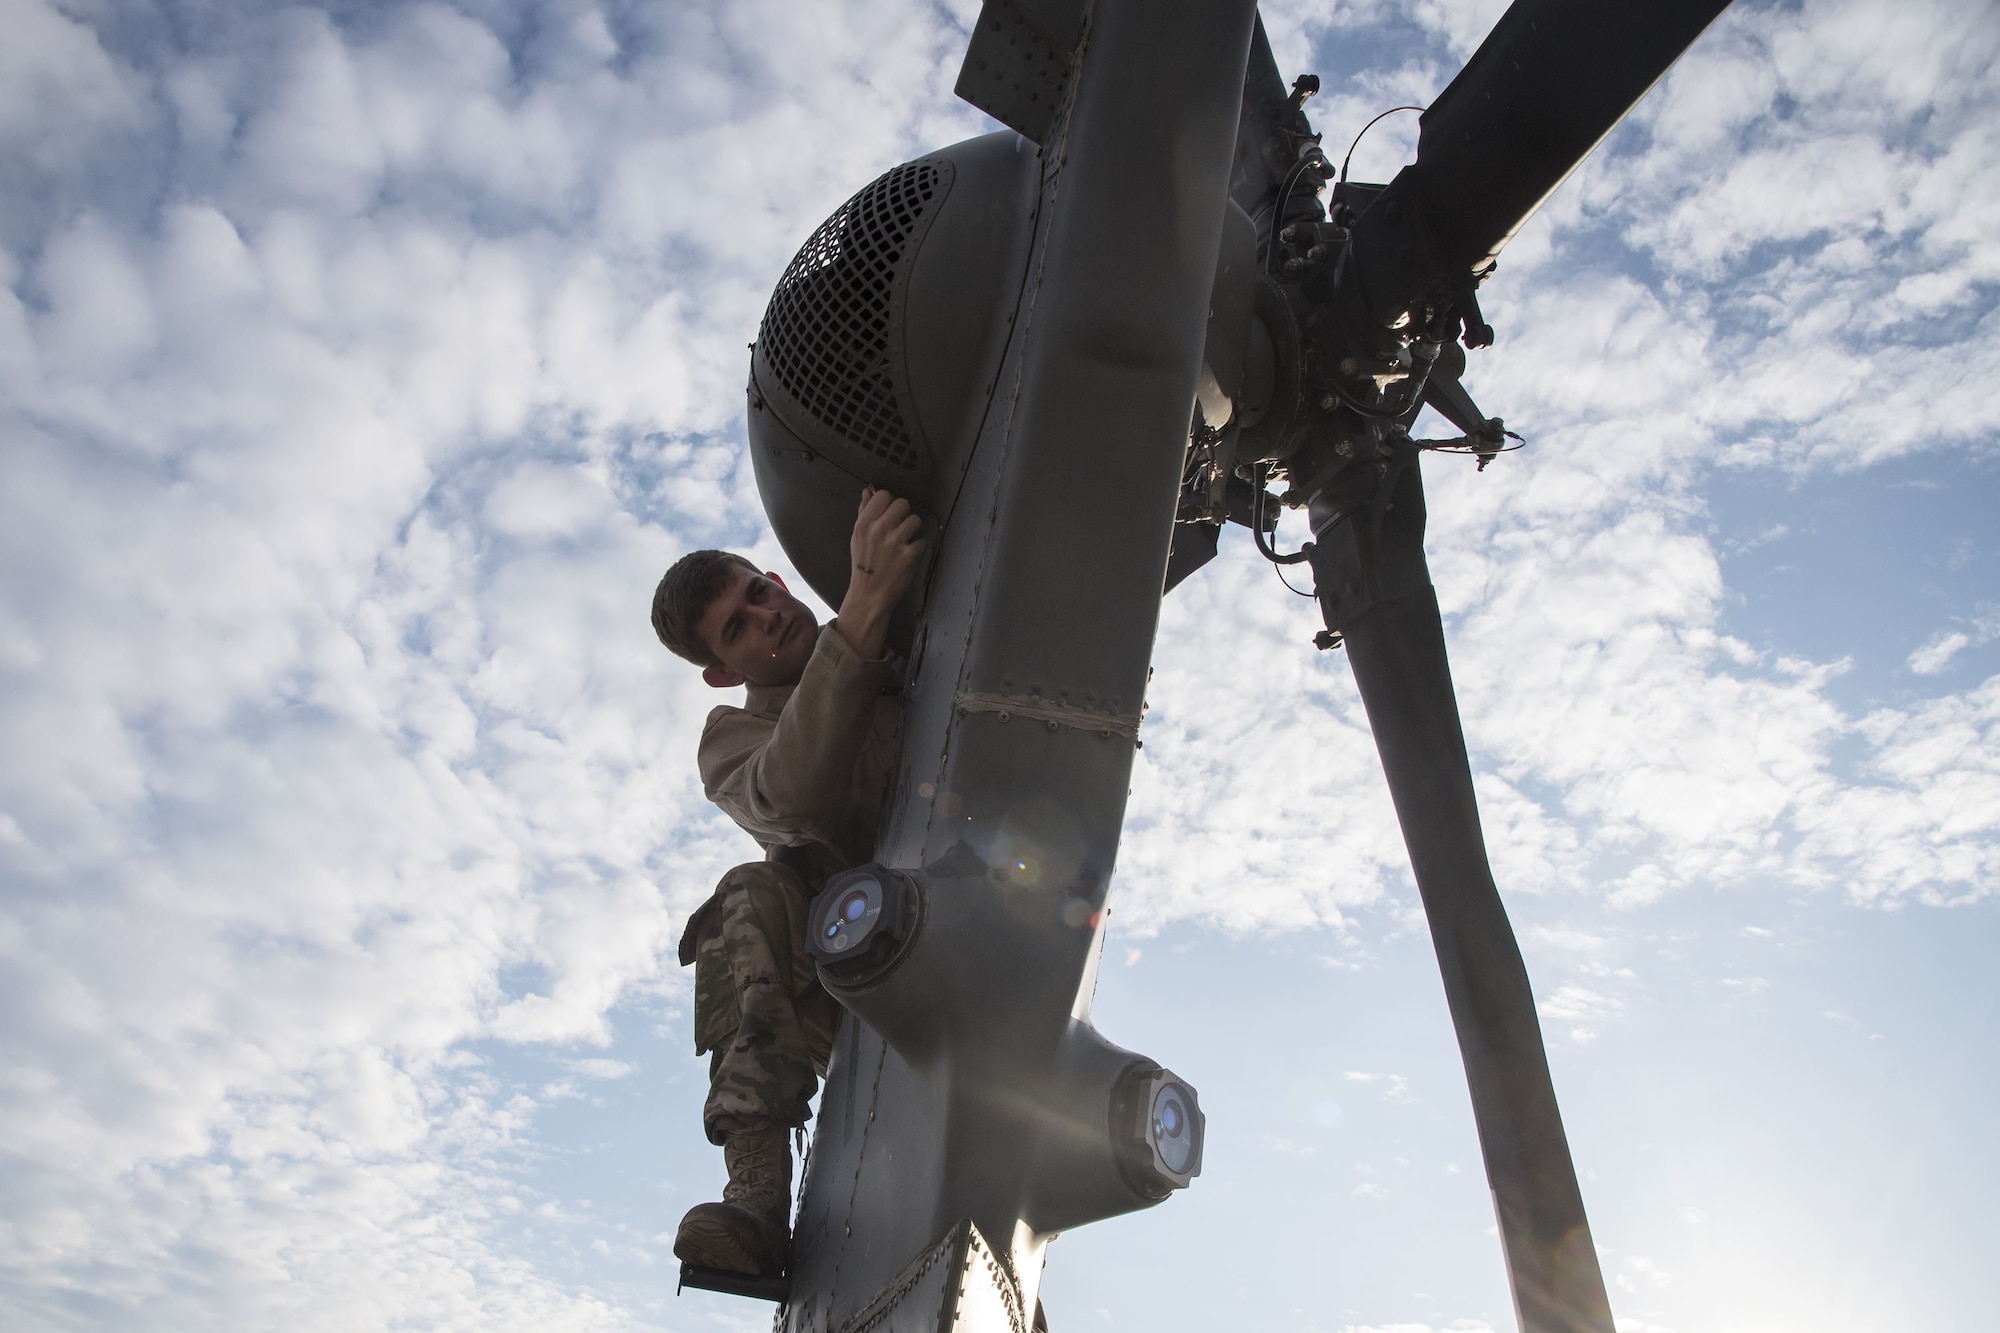 Senior Airman Travis Bauerschmidt, 723d Aircraft Maintenance Squadron (AMXS) aircraft hydraulics systems journeyman, loosens a screw on the tail rotor of an HH-60G Pave Hawk, Dec. 15, 2017, at Moody Air Force Base, Ga. Members from the 723d Aircraft Maintenance Squadron (AMXS) and 23d Civil Engineer Squadron (CES) participated in a training day to help improve their readiness and get extra practice at their crafts. The AMXS performed maintenance on helicopters and the CES conducted rescue operations by extinguishing a mock fire within an HH-60G Pave Hawk and extracting injured victims. (U.S. Air Force photo by Airman Eugene Oliver)